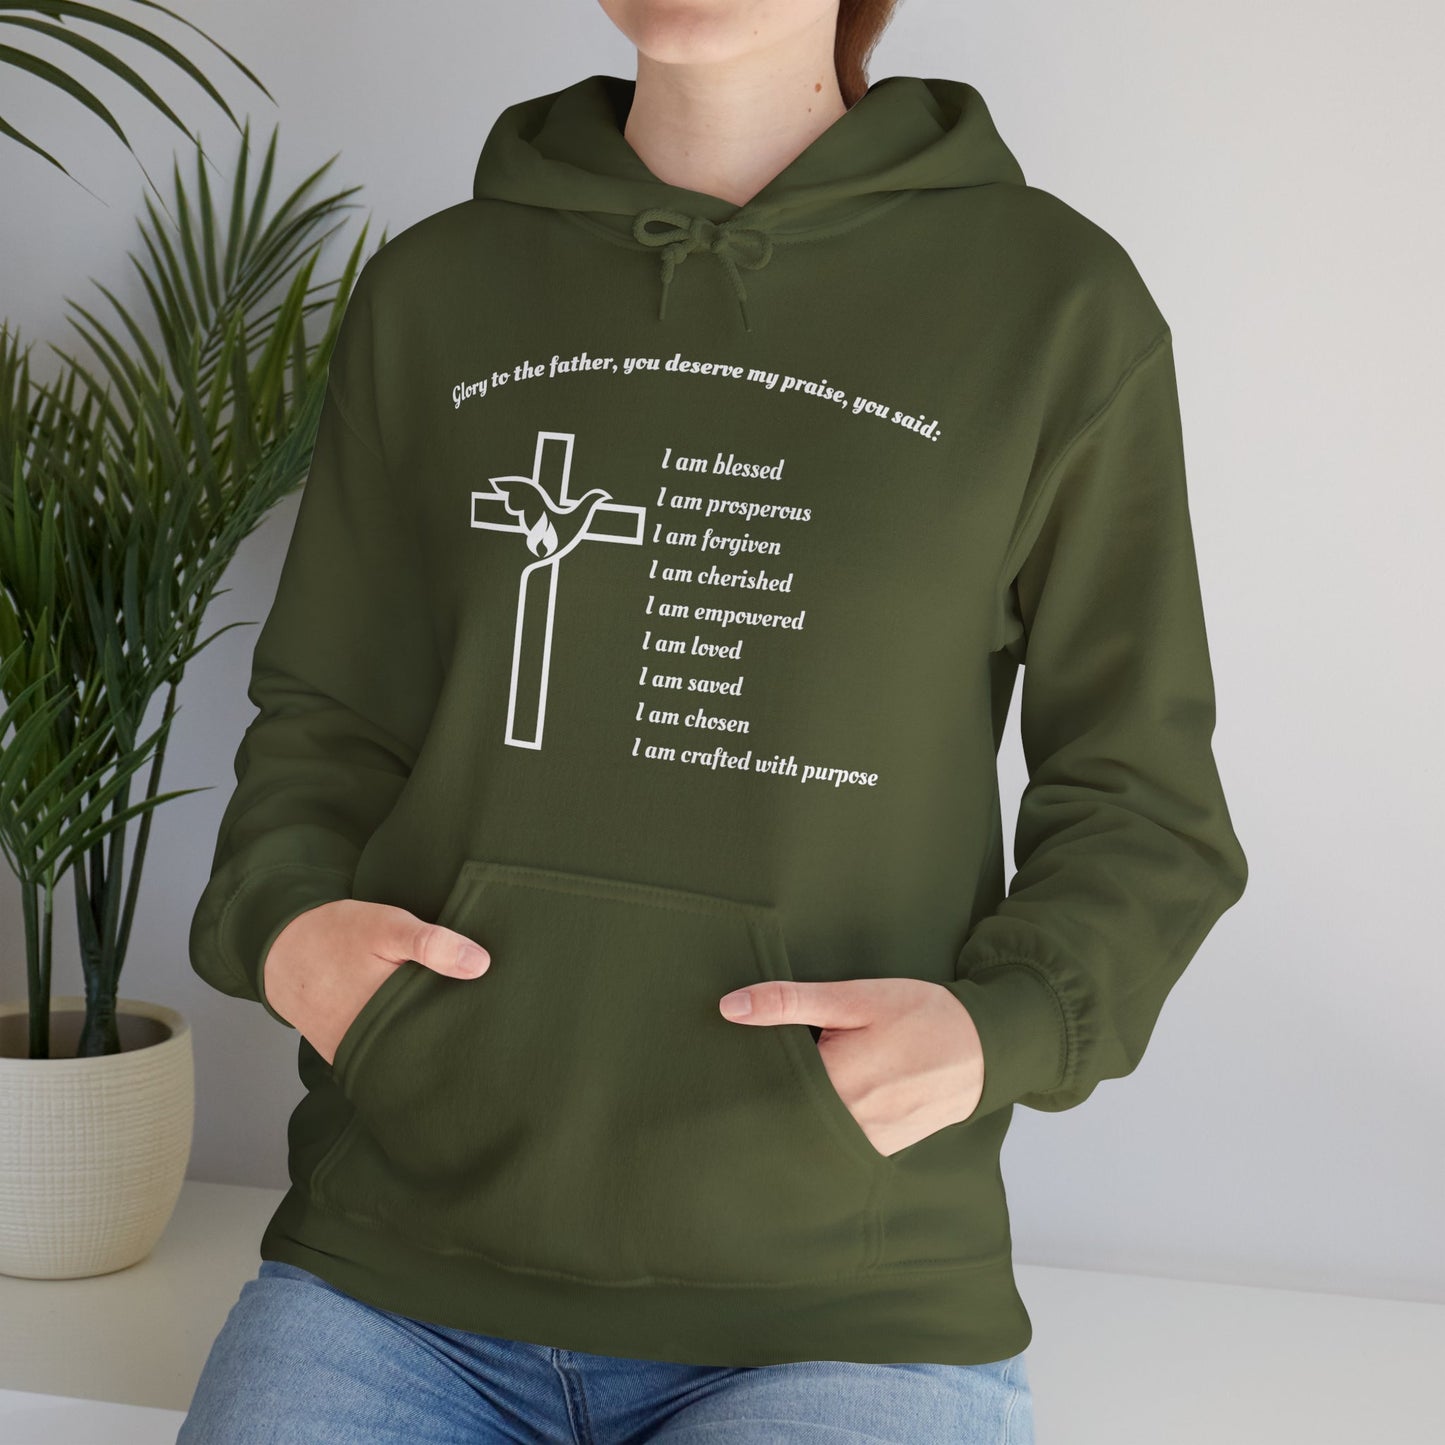 I am Glory to the Father Hooded Sweatshirt Unisex Cozy Heavy Blend9